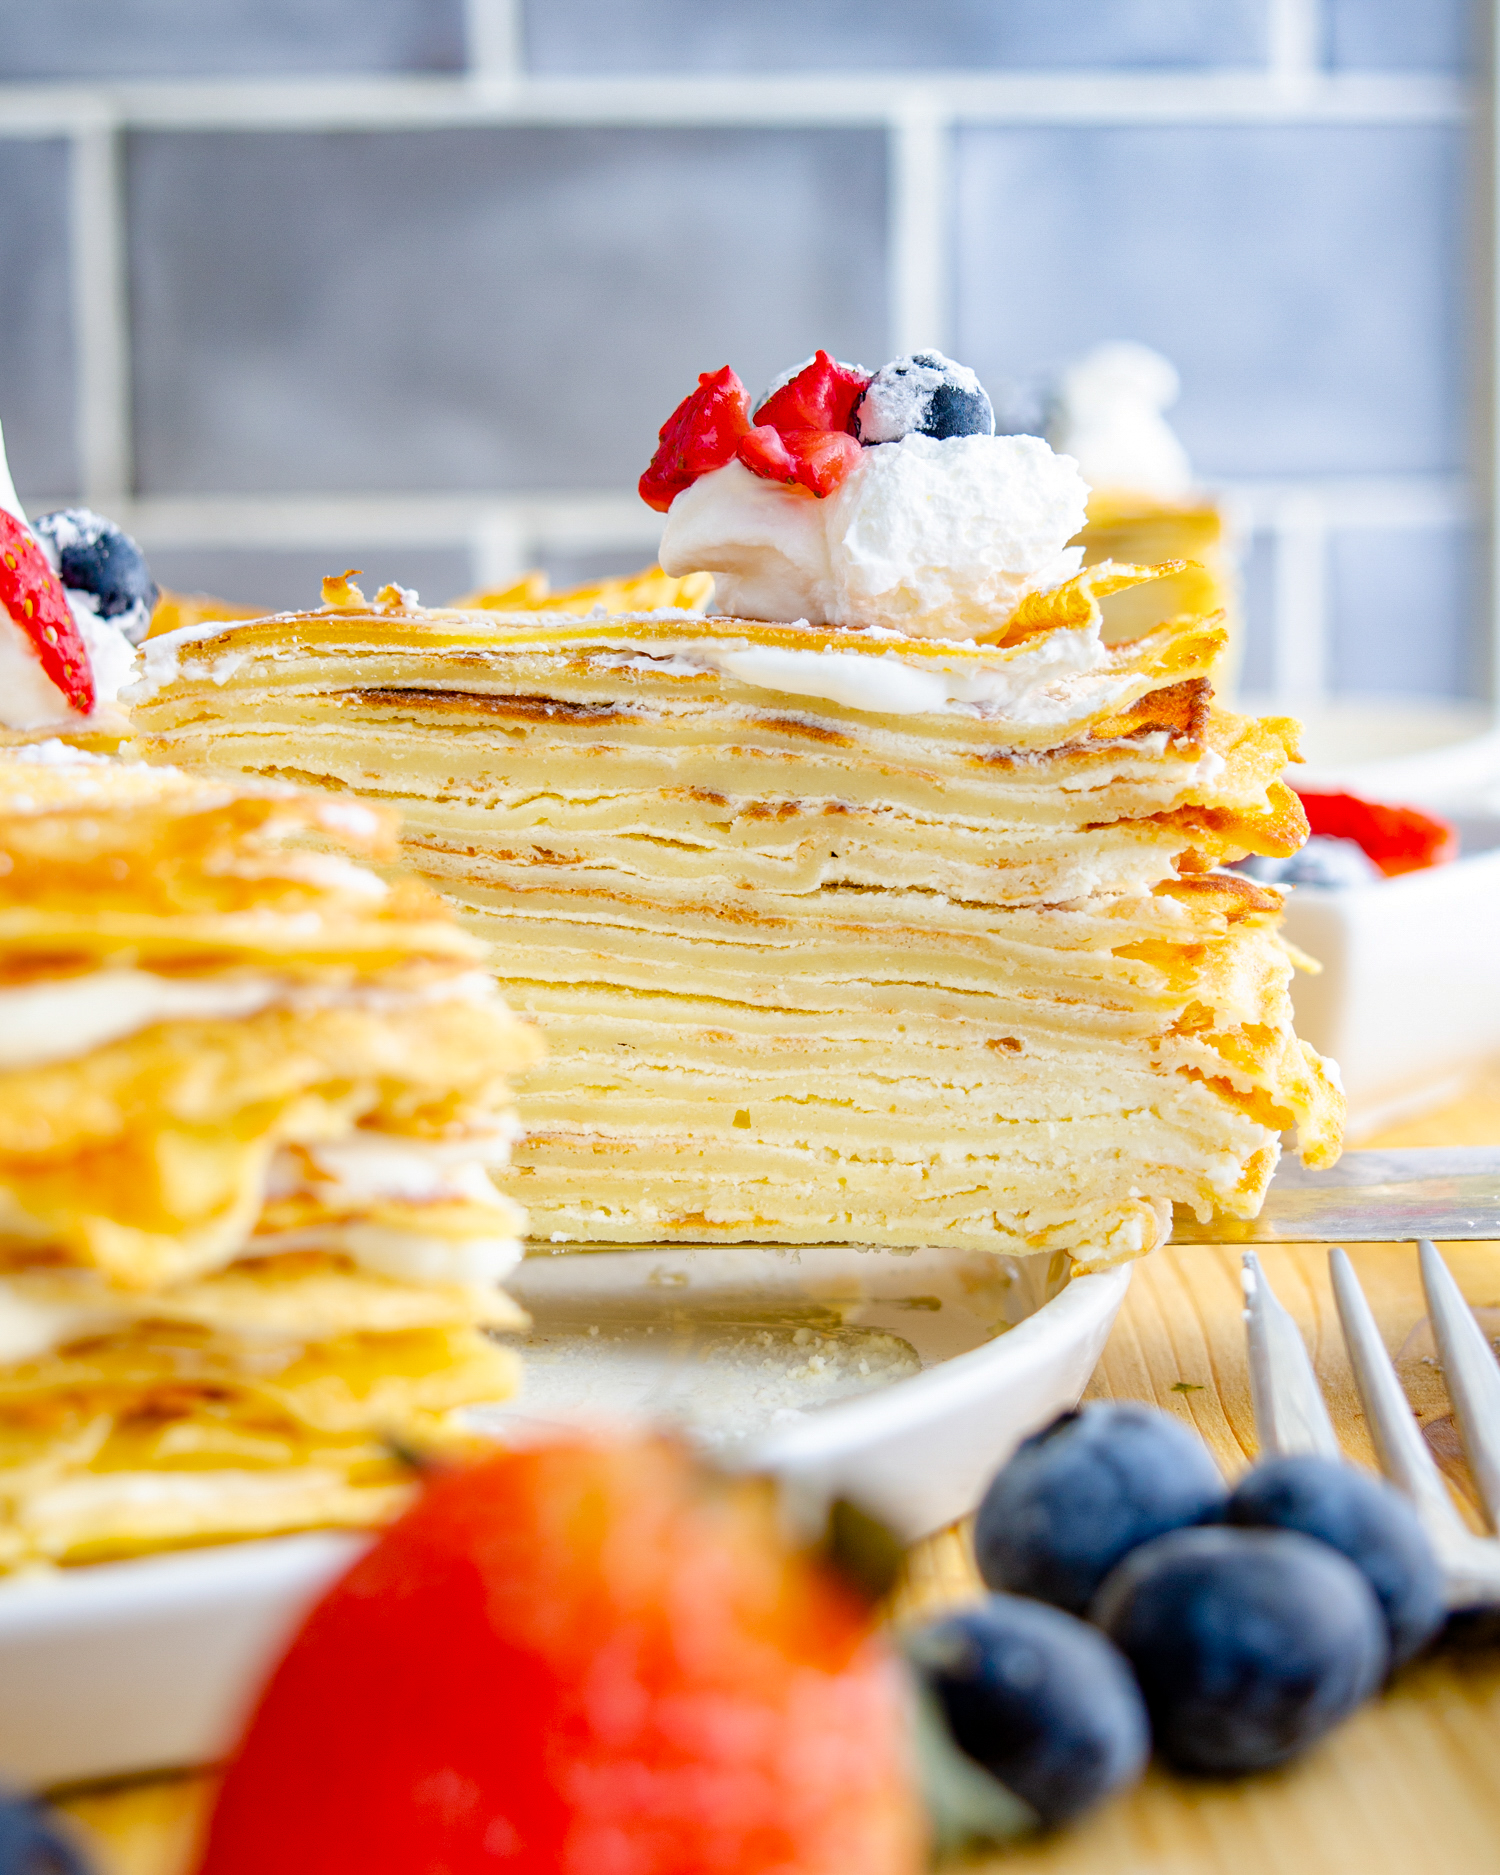 Layered crepe cake, French crepe cake, Mille crepe, Crepe layered cake, Crepe Cake